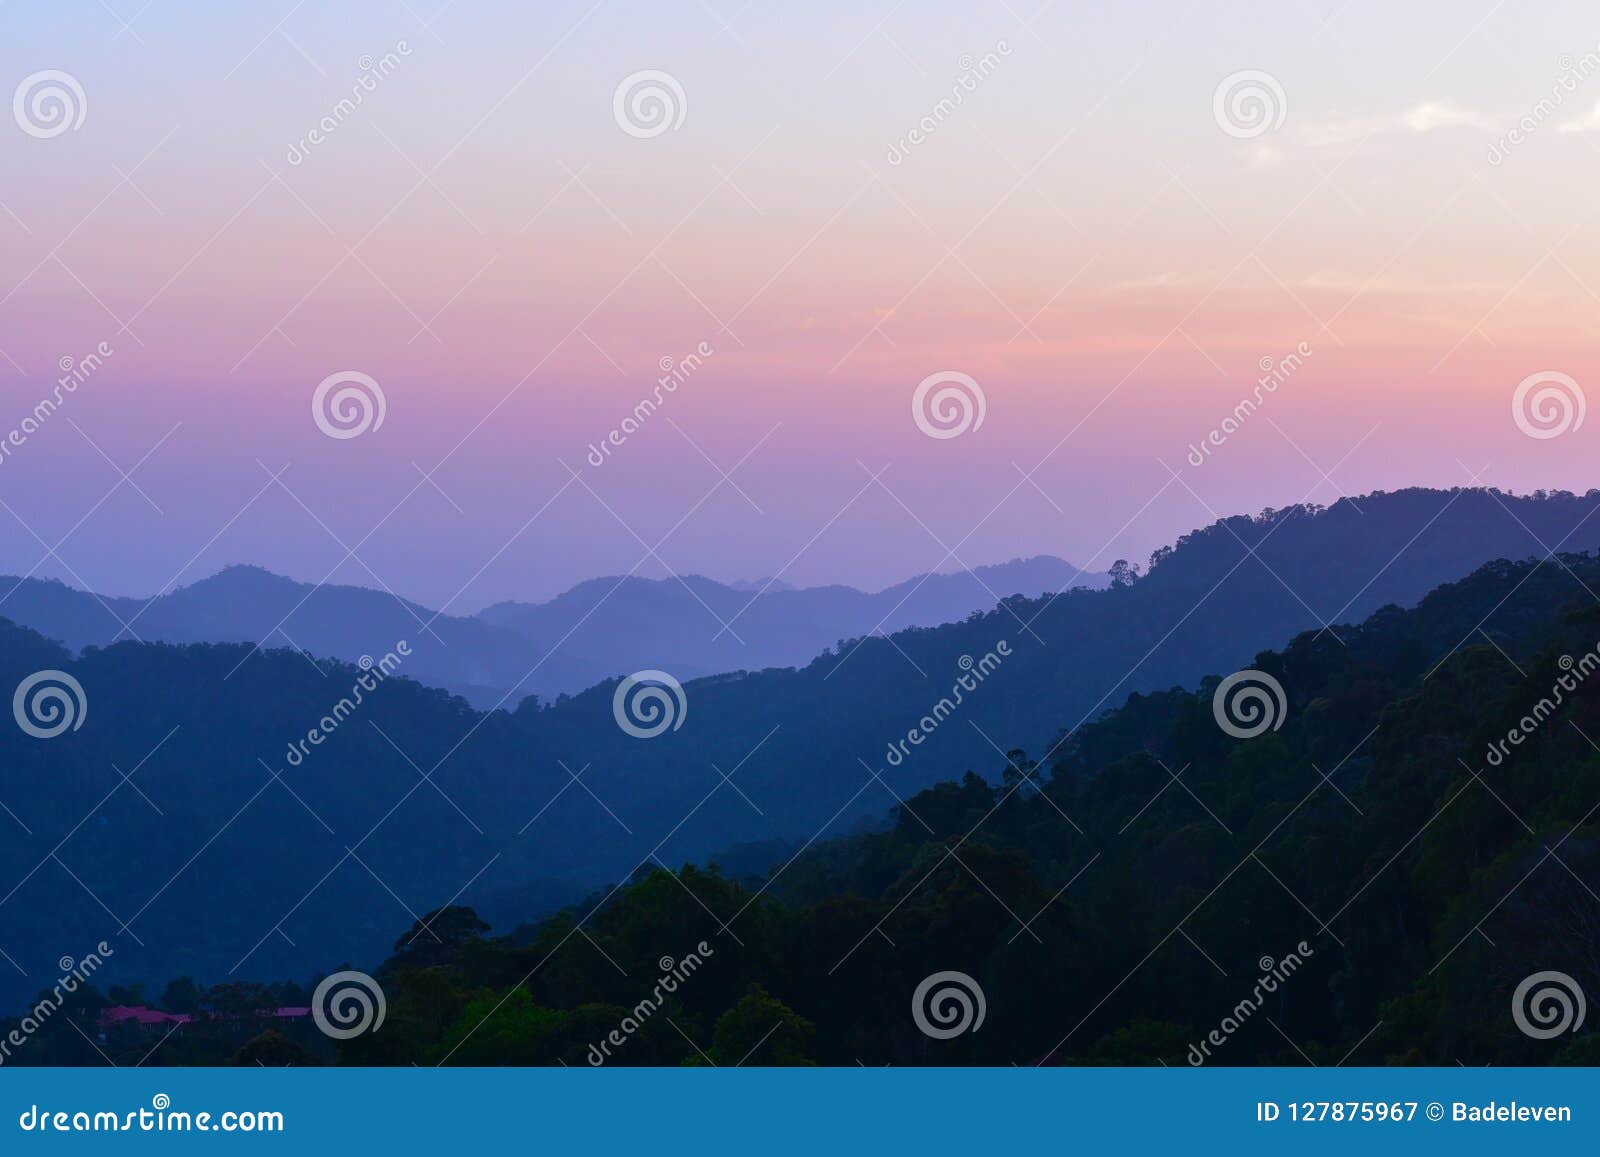 colorfull and natural mountain forest silhoutte